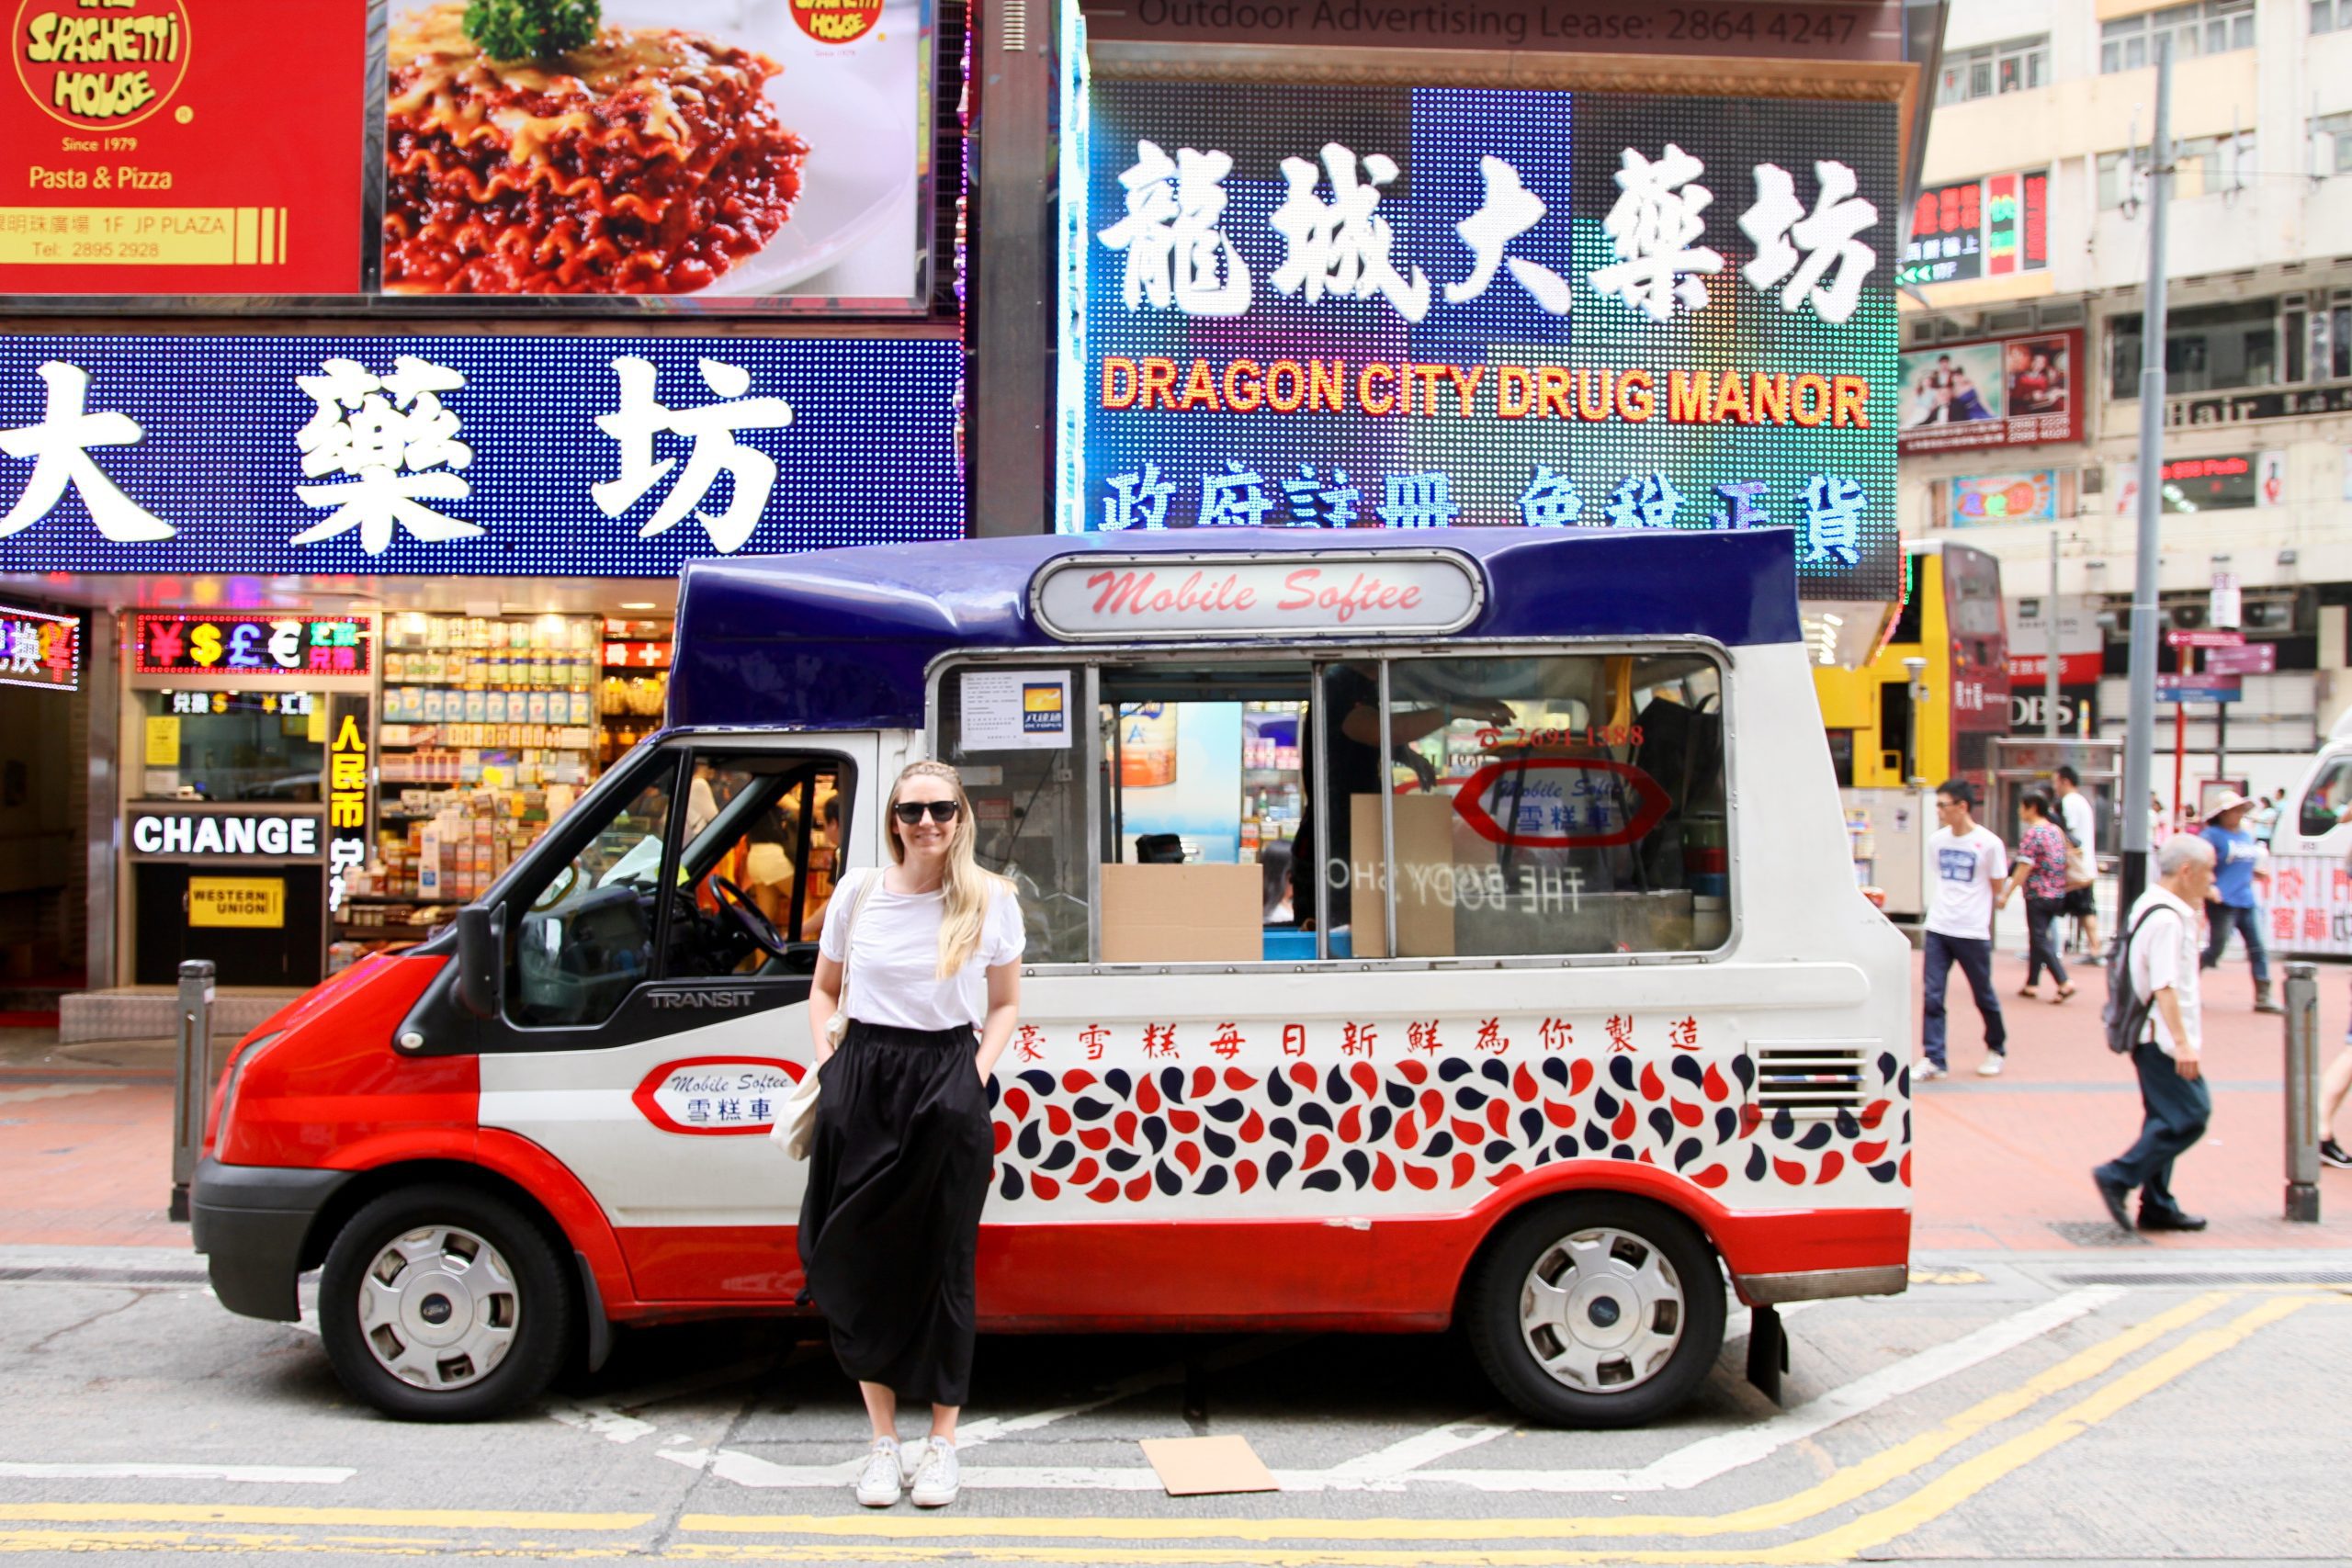 Mister Softee 47 Things to do in Hong Kong Travel Blog